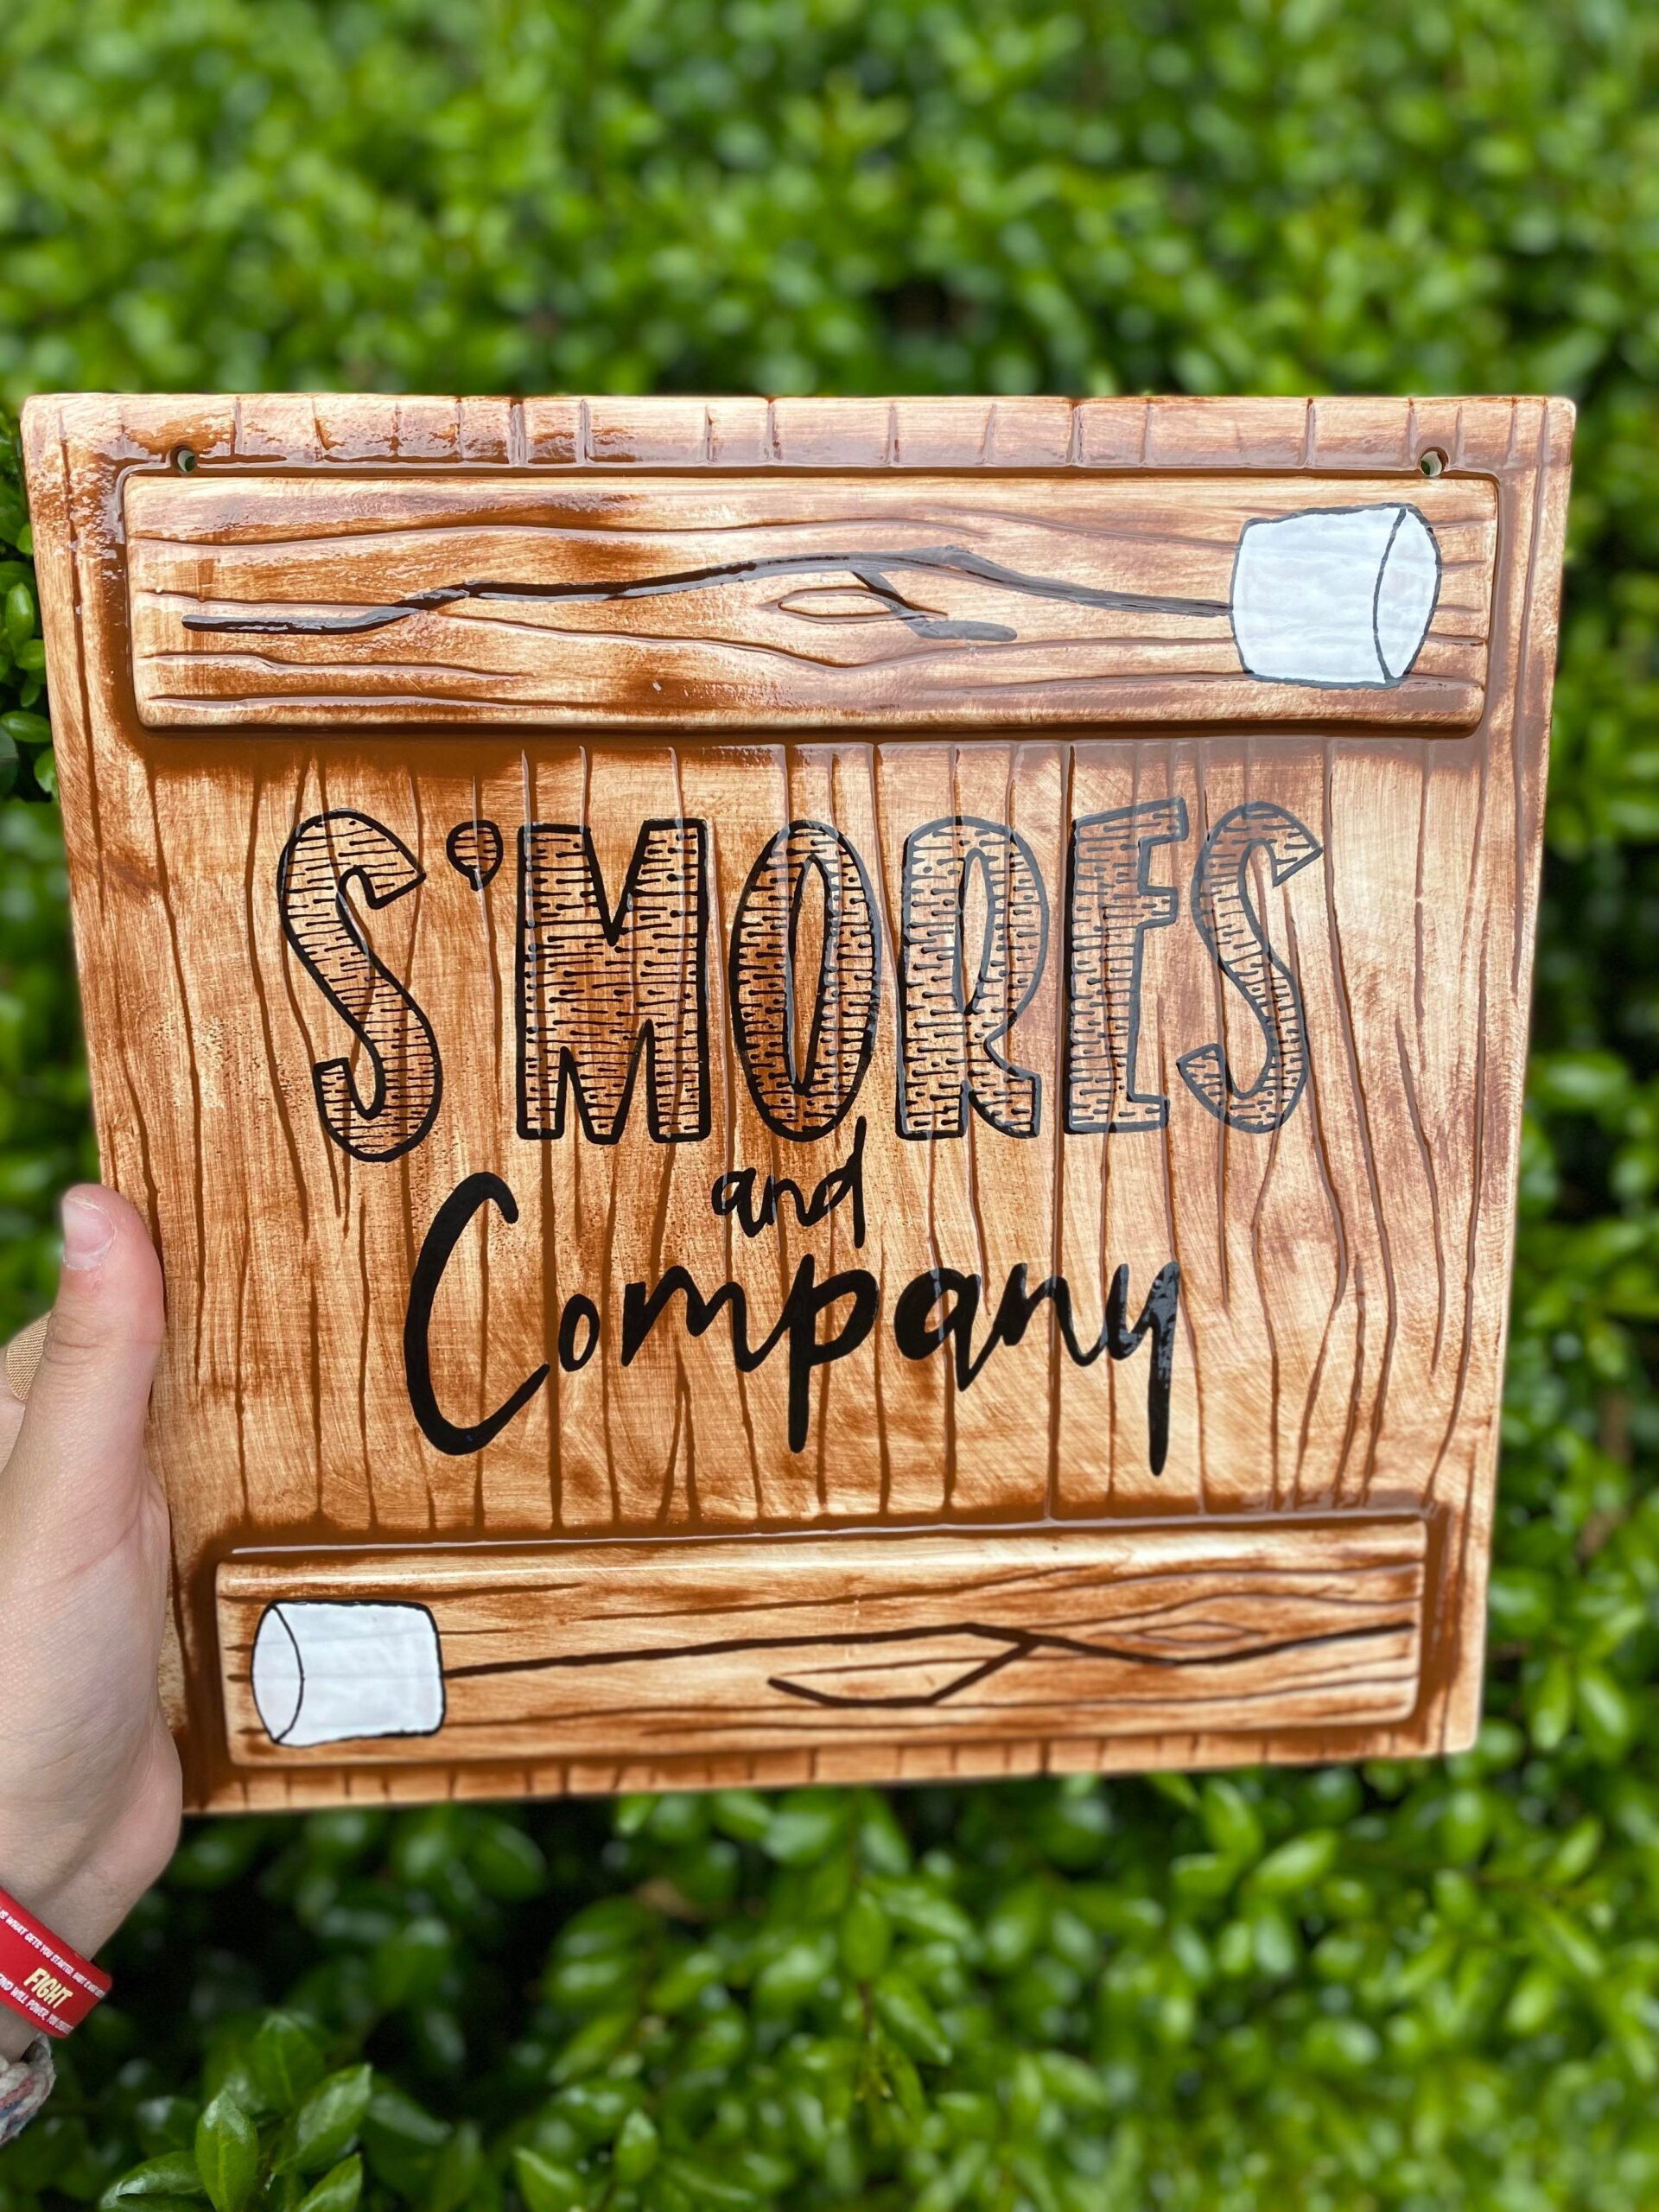 A hand holding up a wooden box with the words " s 'm ores and company ".